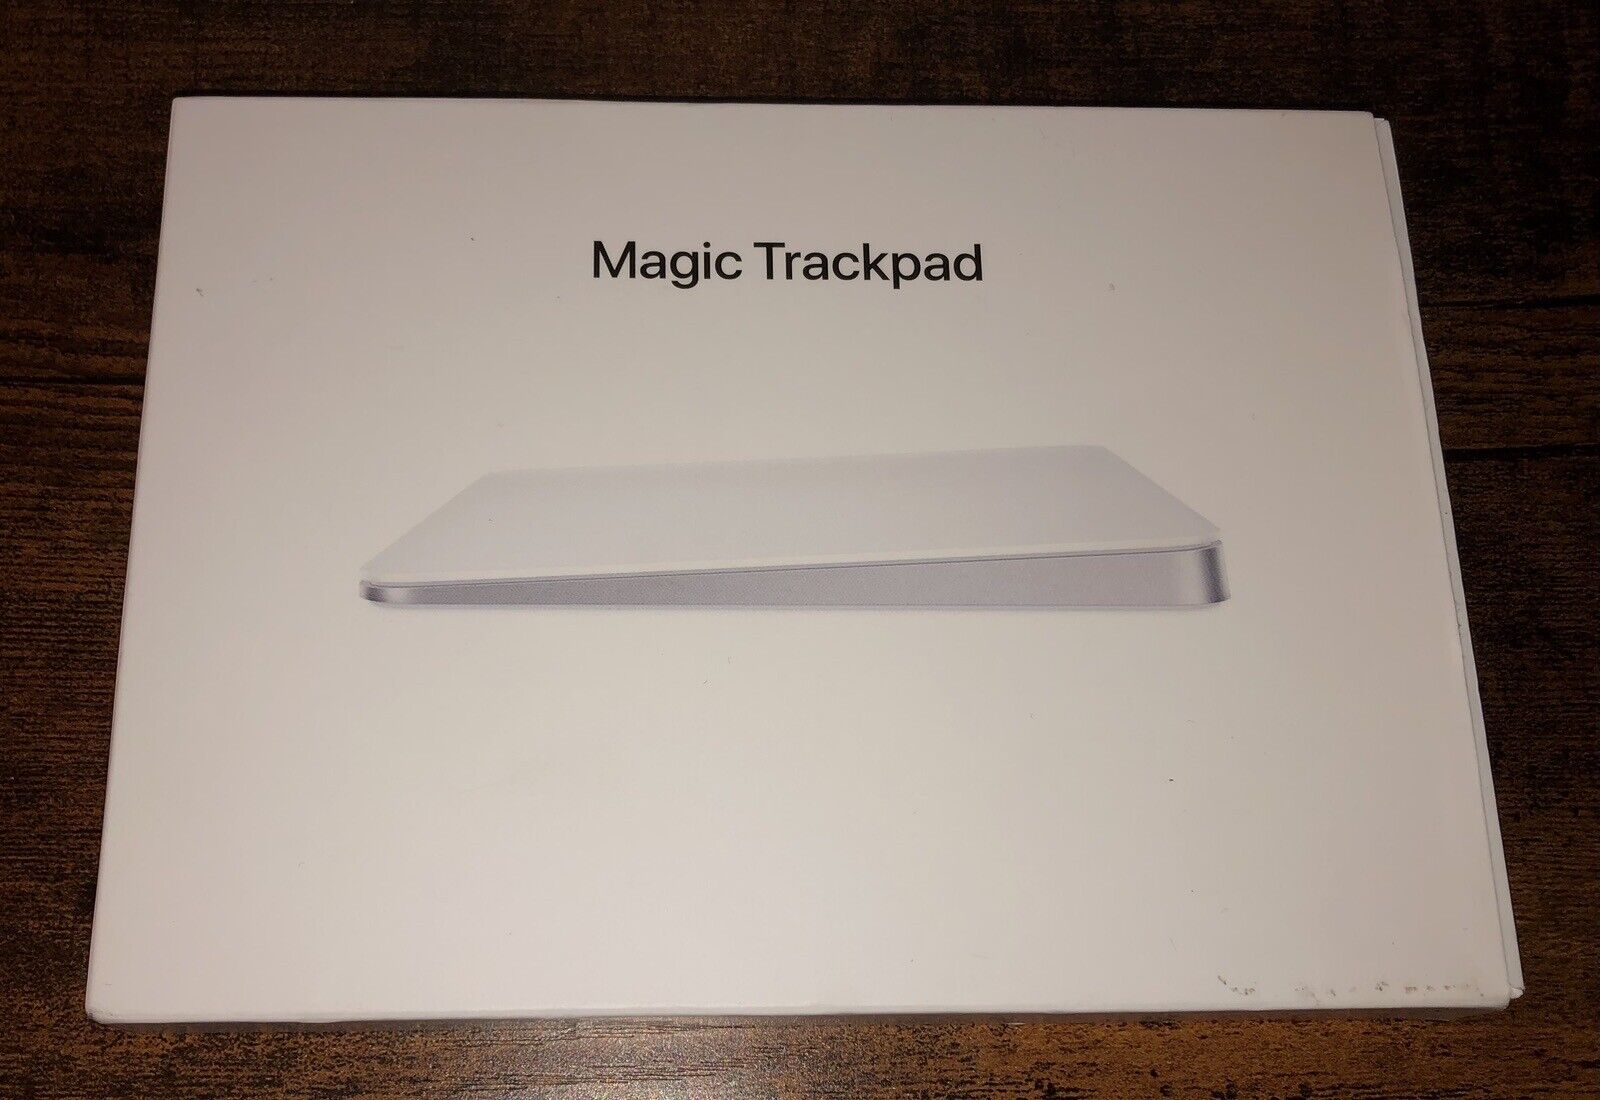 New Sealed Apple Magic Trackpad Wireless Multi-Touch Surface - White MK2D3AM/A